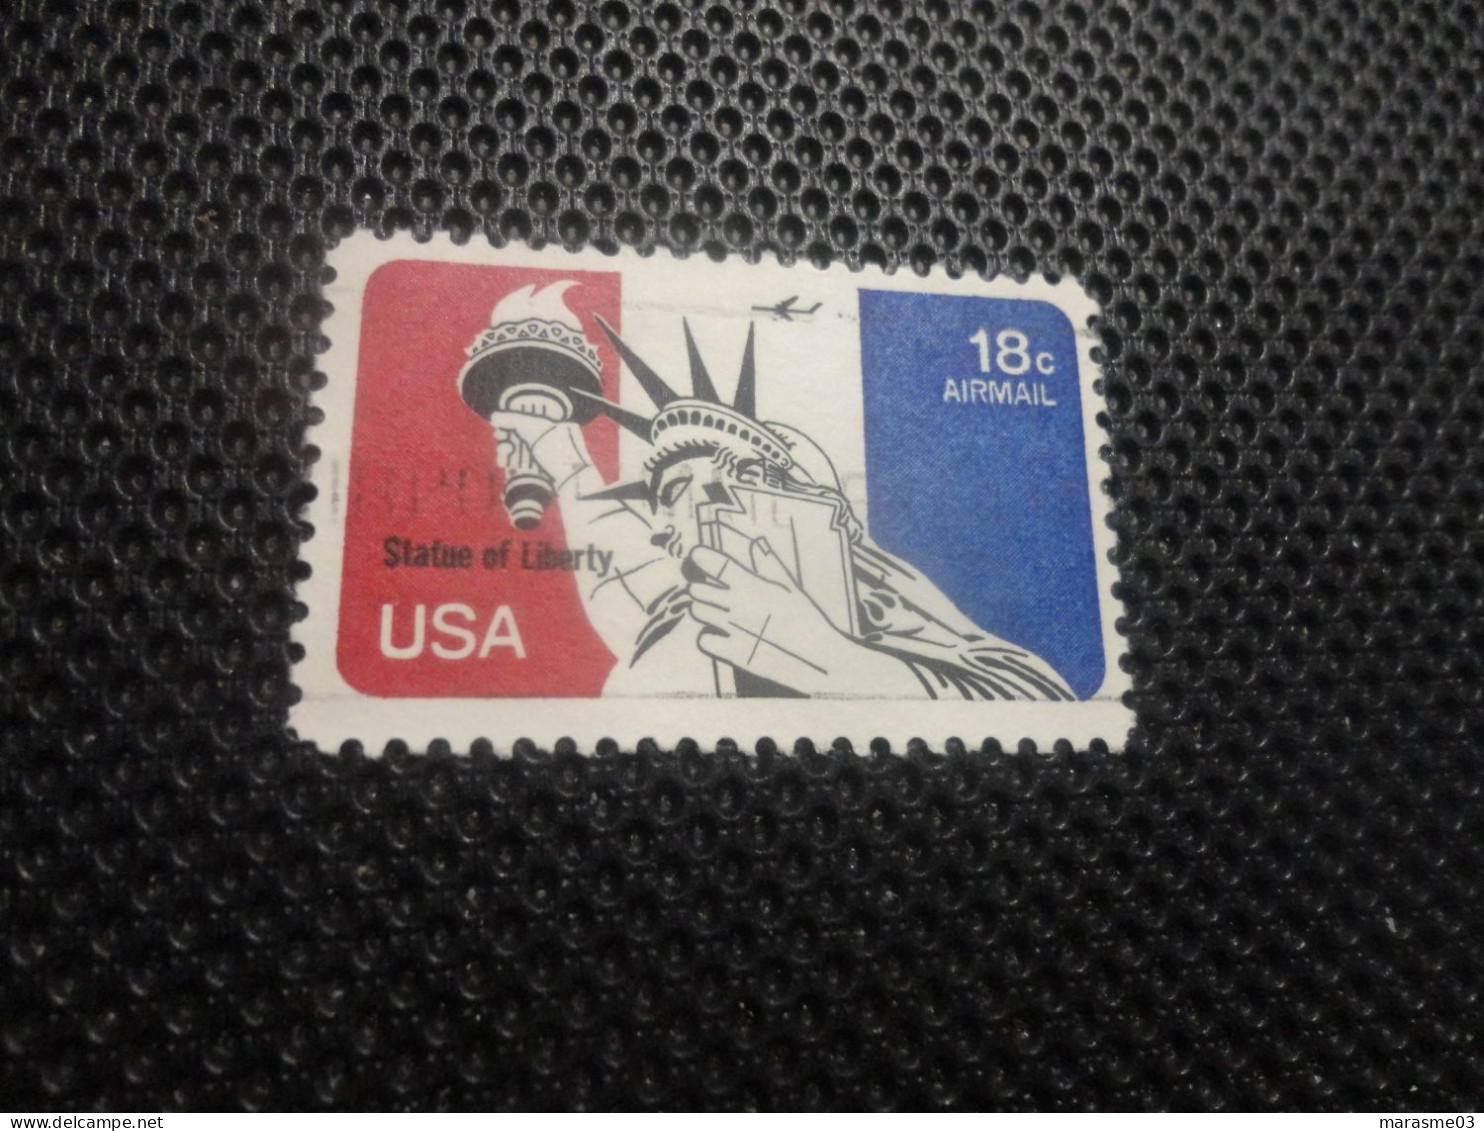 TIMBRE : U.S. Statue Of Liberty- MNH 18c 1974- Unused Mint Airmail Stamp - Used Stamps